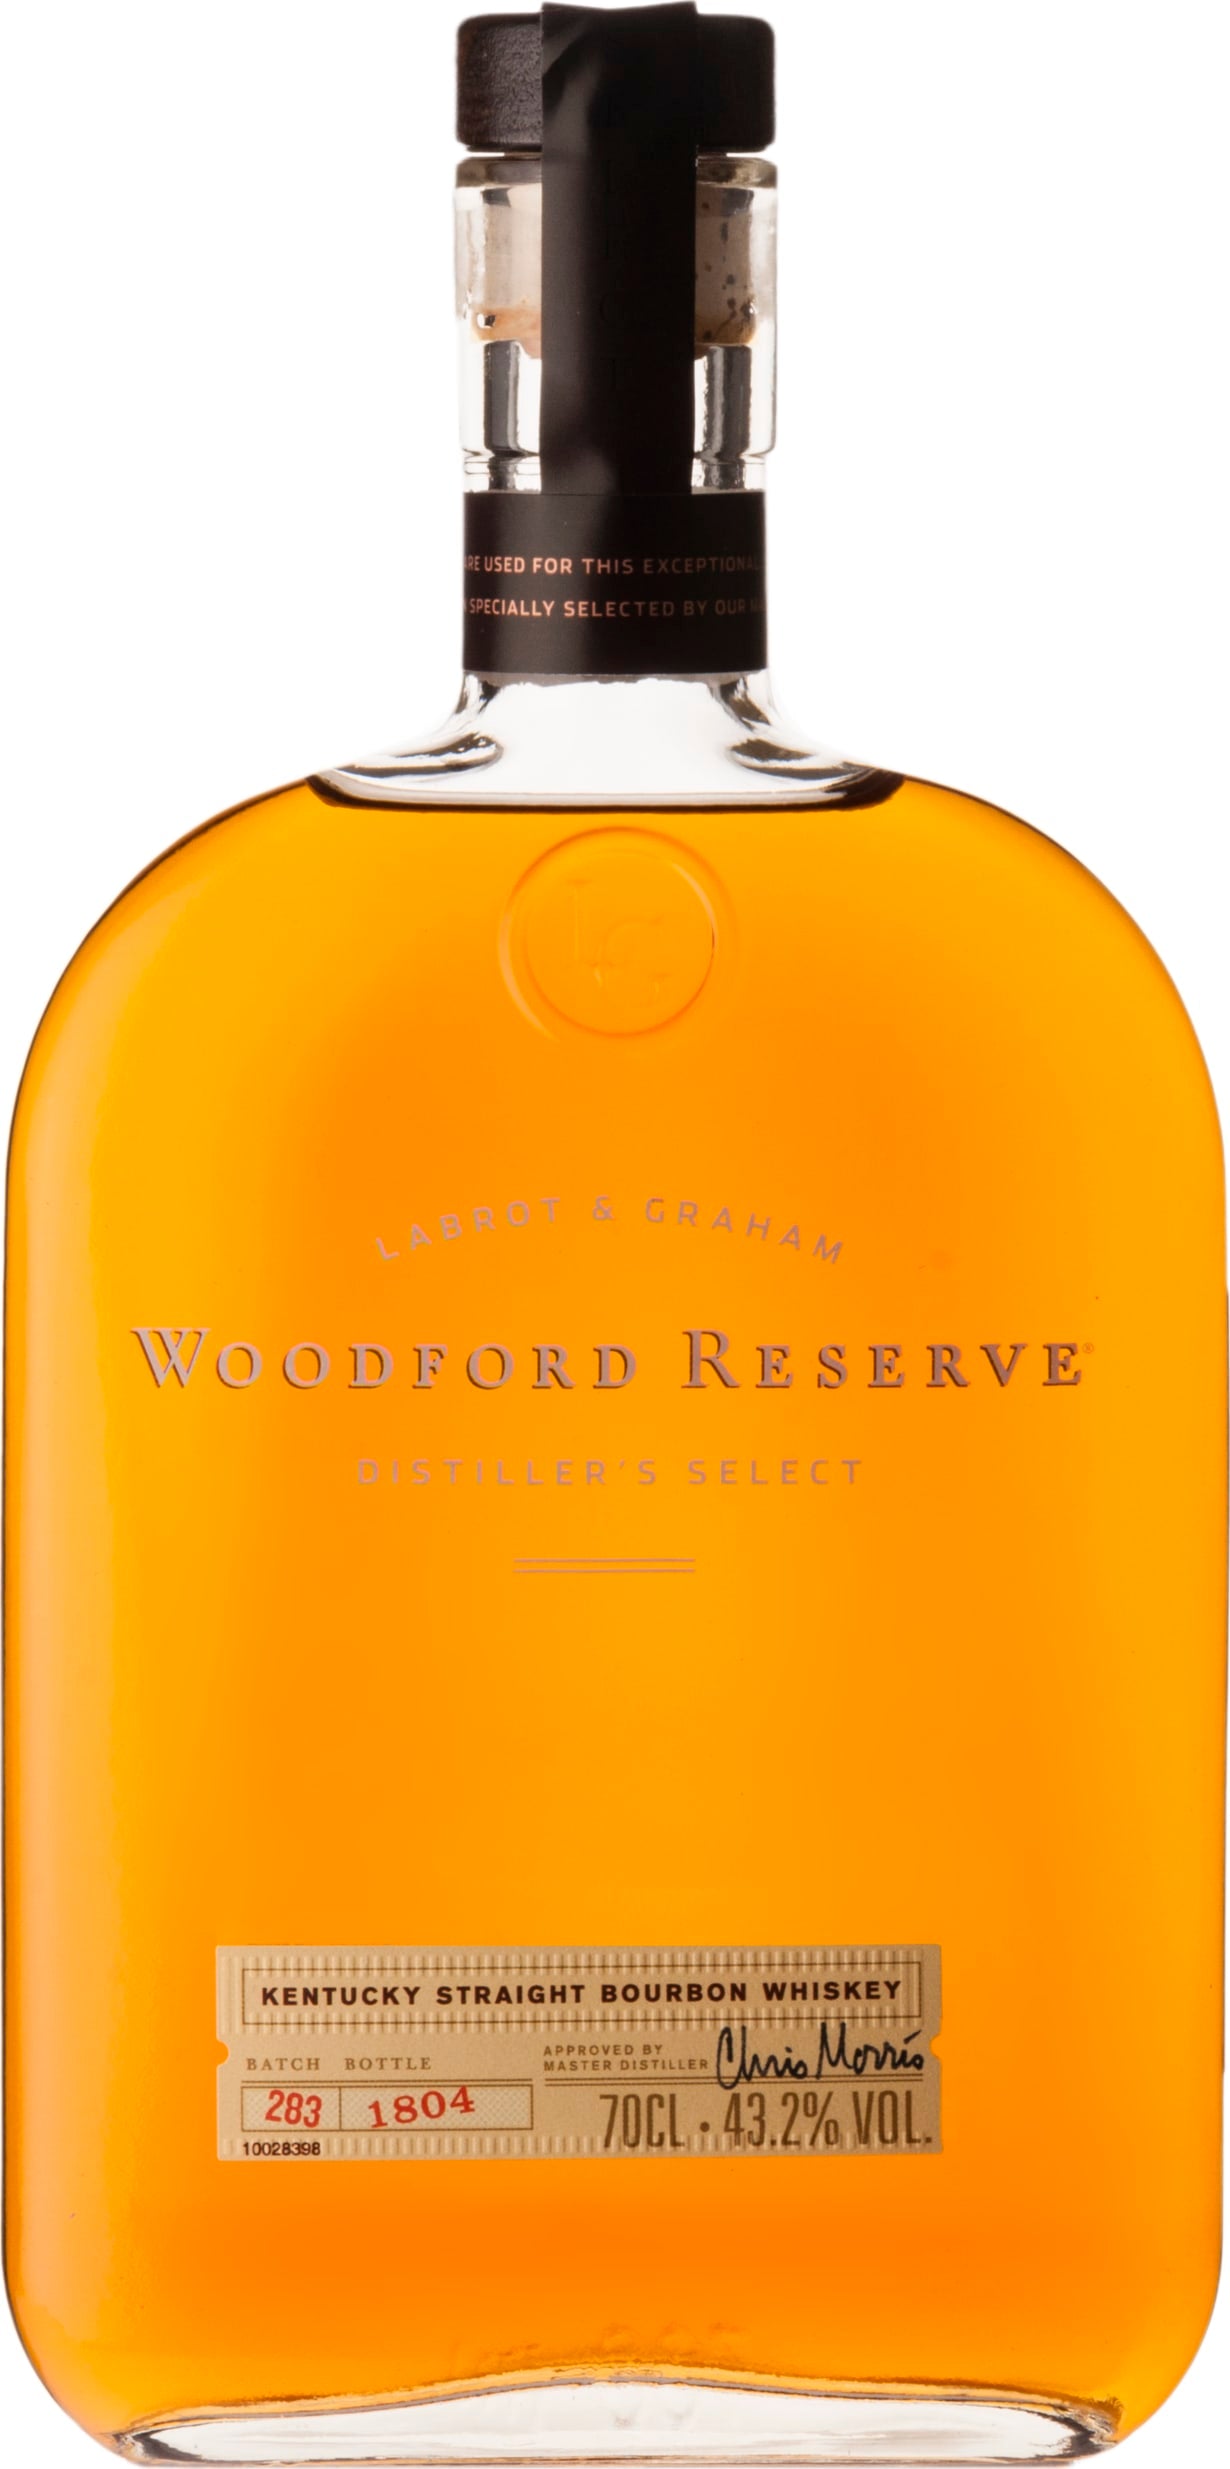 Woodford Reserve Bourbon 70cl NV - Buy Woodford Reserve Wines from GREAT WINES DIRECT wine shop